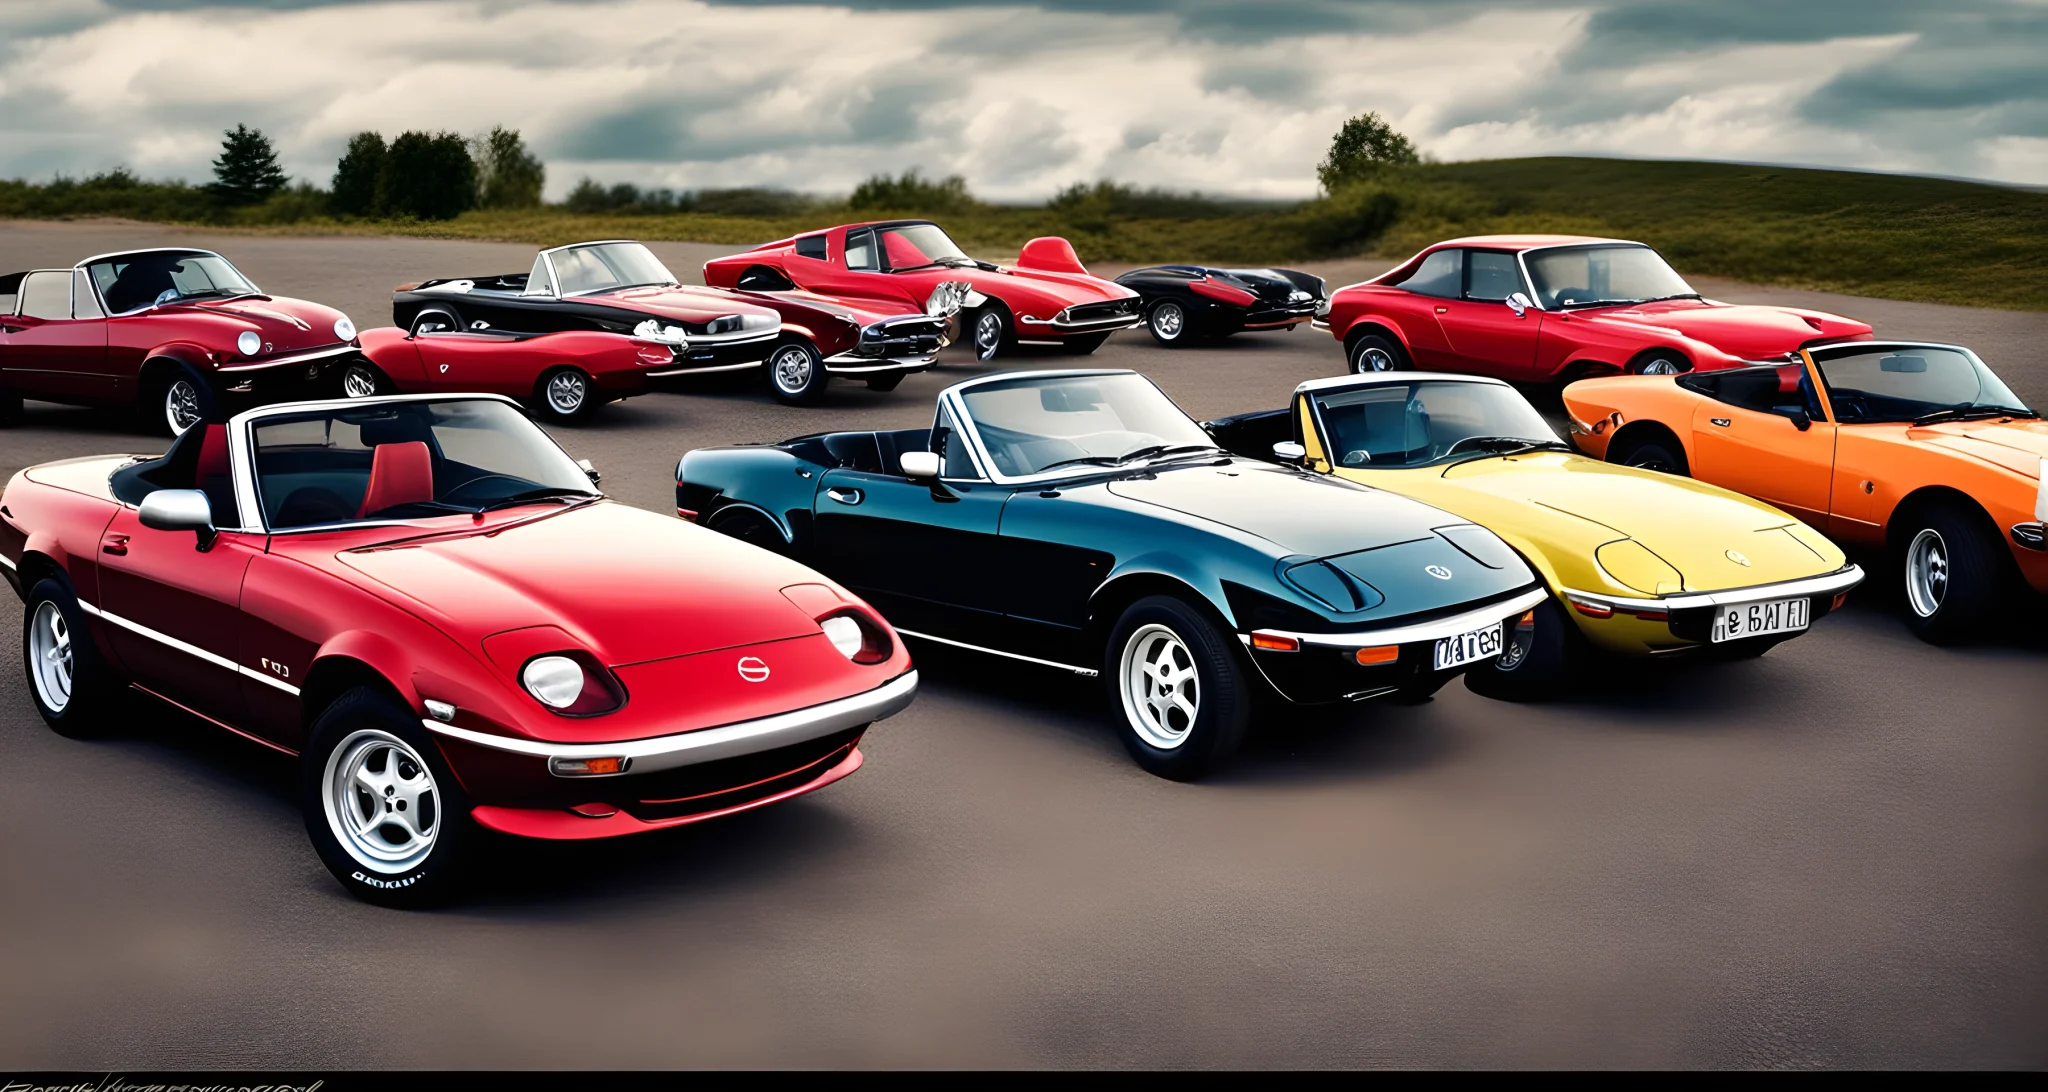 The image features a collection of vintage Mazda classic cars, including the RX-7, Miata, and MX-5.